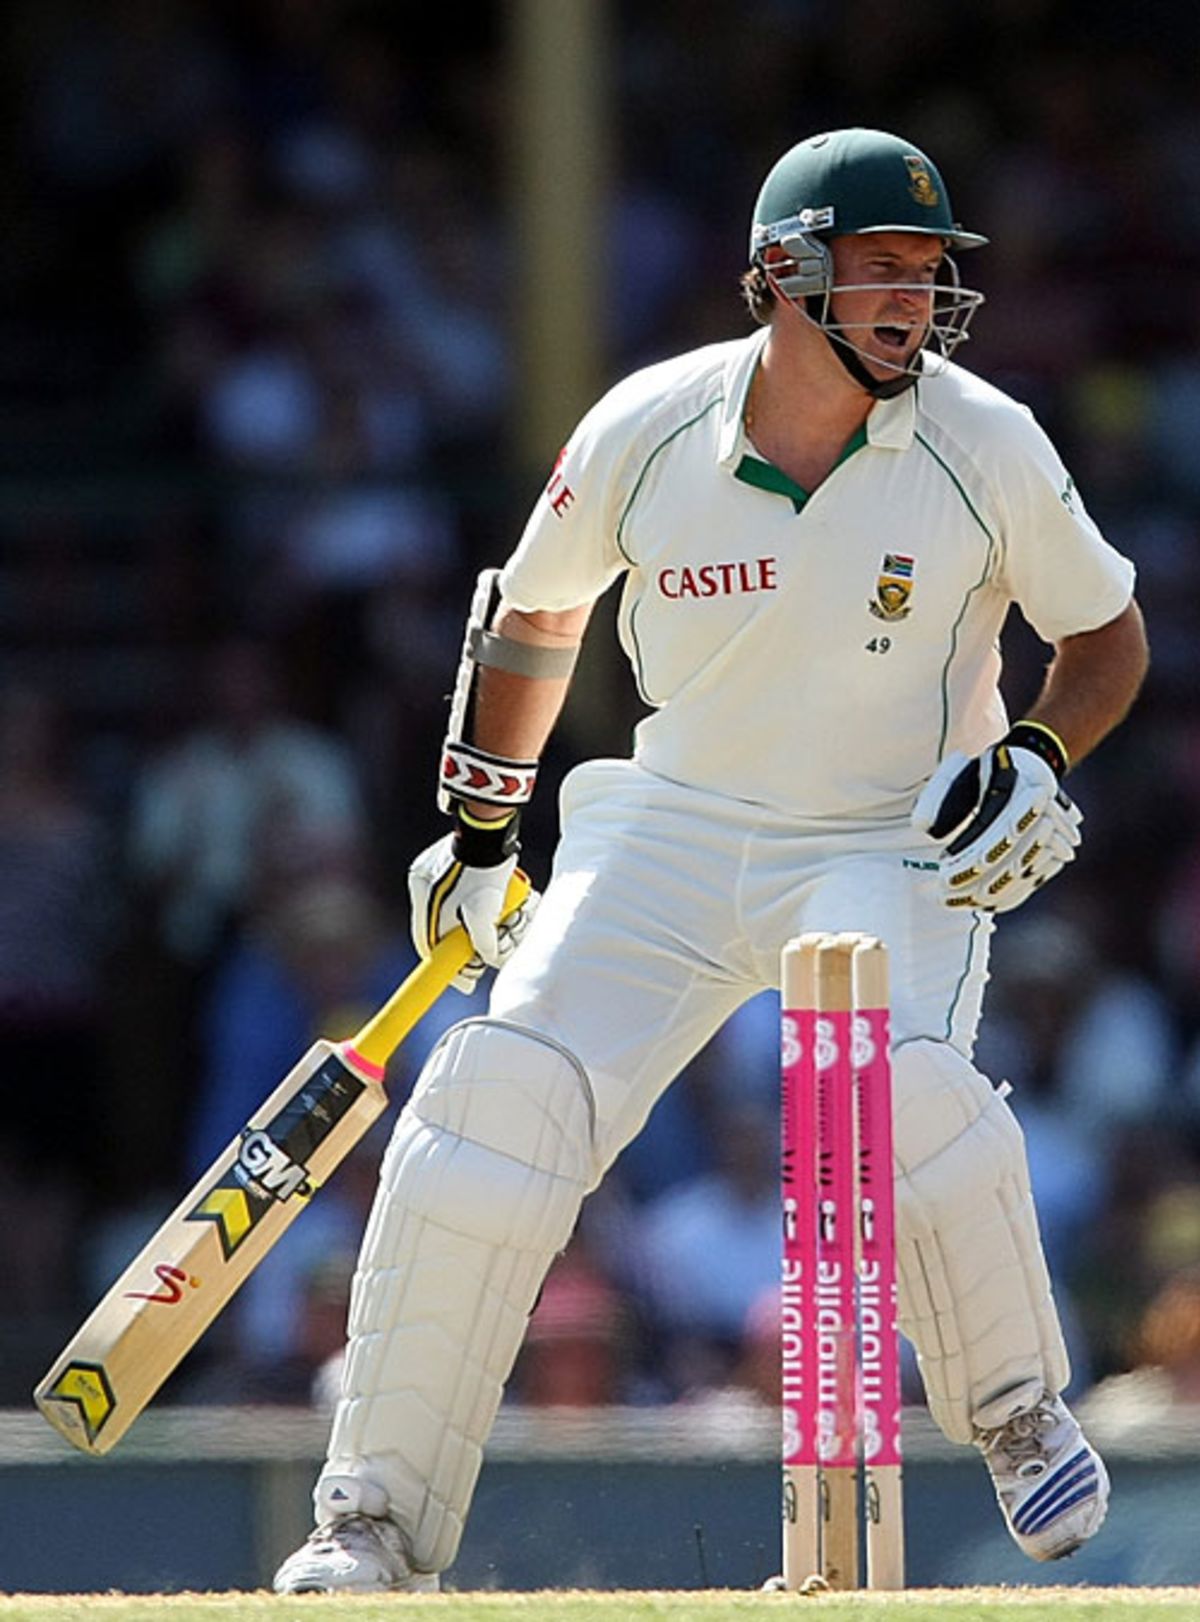 Graeme Smith reacts after being hit on his left arm, Australia v South Africa, 3rd Test, 2nd day, Sydney, January 4, 2009 @PA Photos